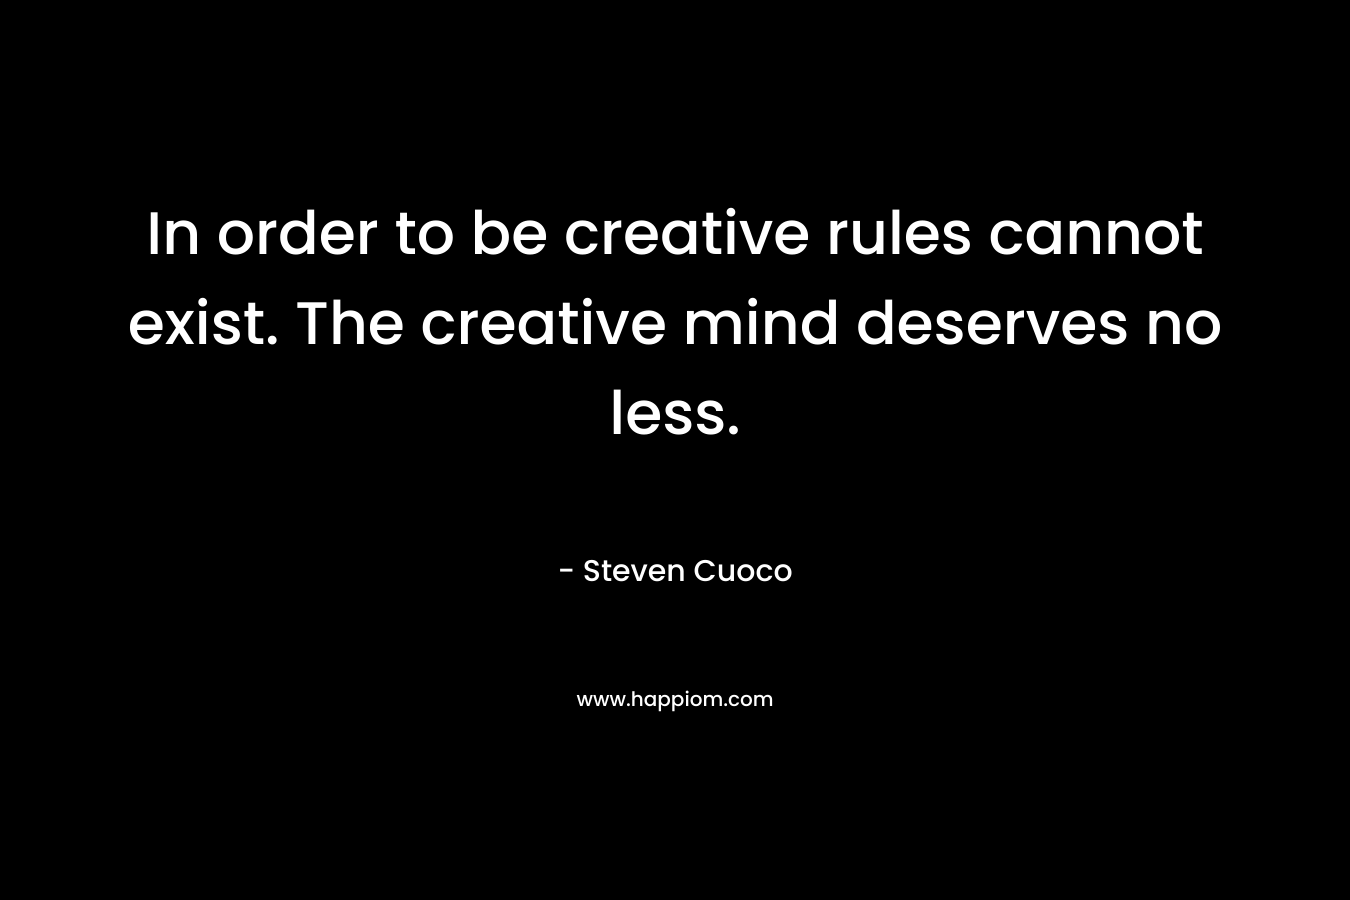 In order to be creative rules cannot exist. The creative mind deserves no less.